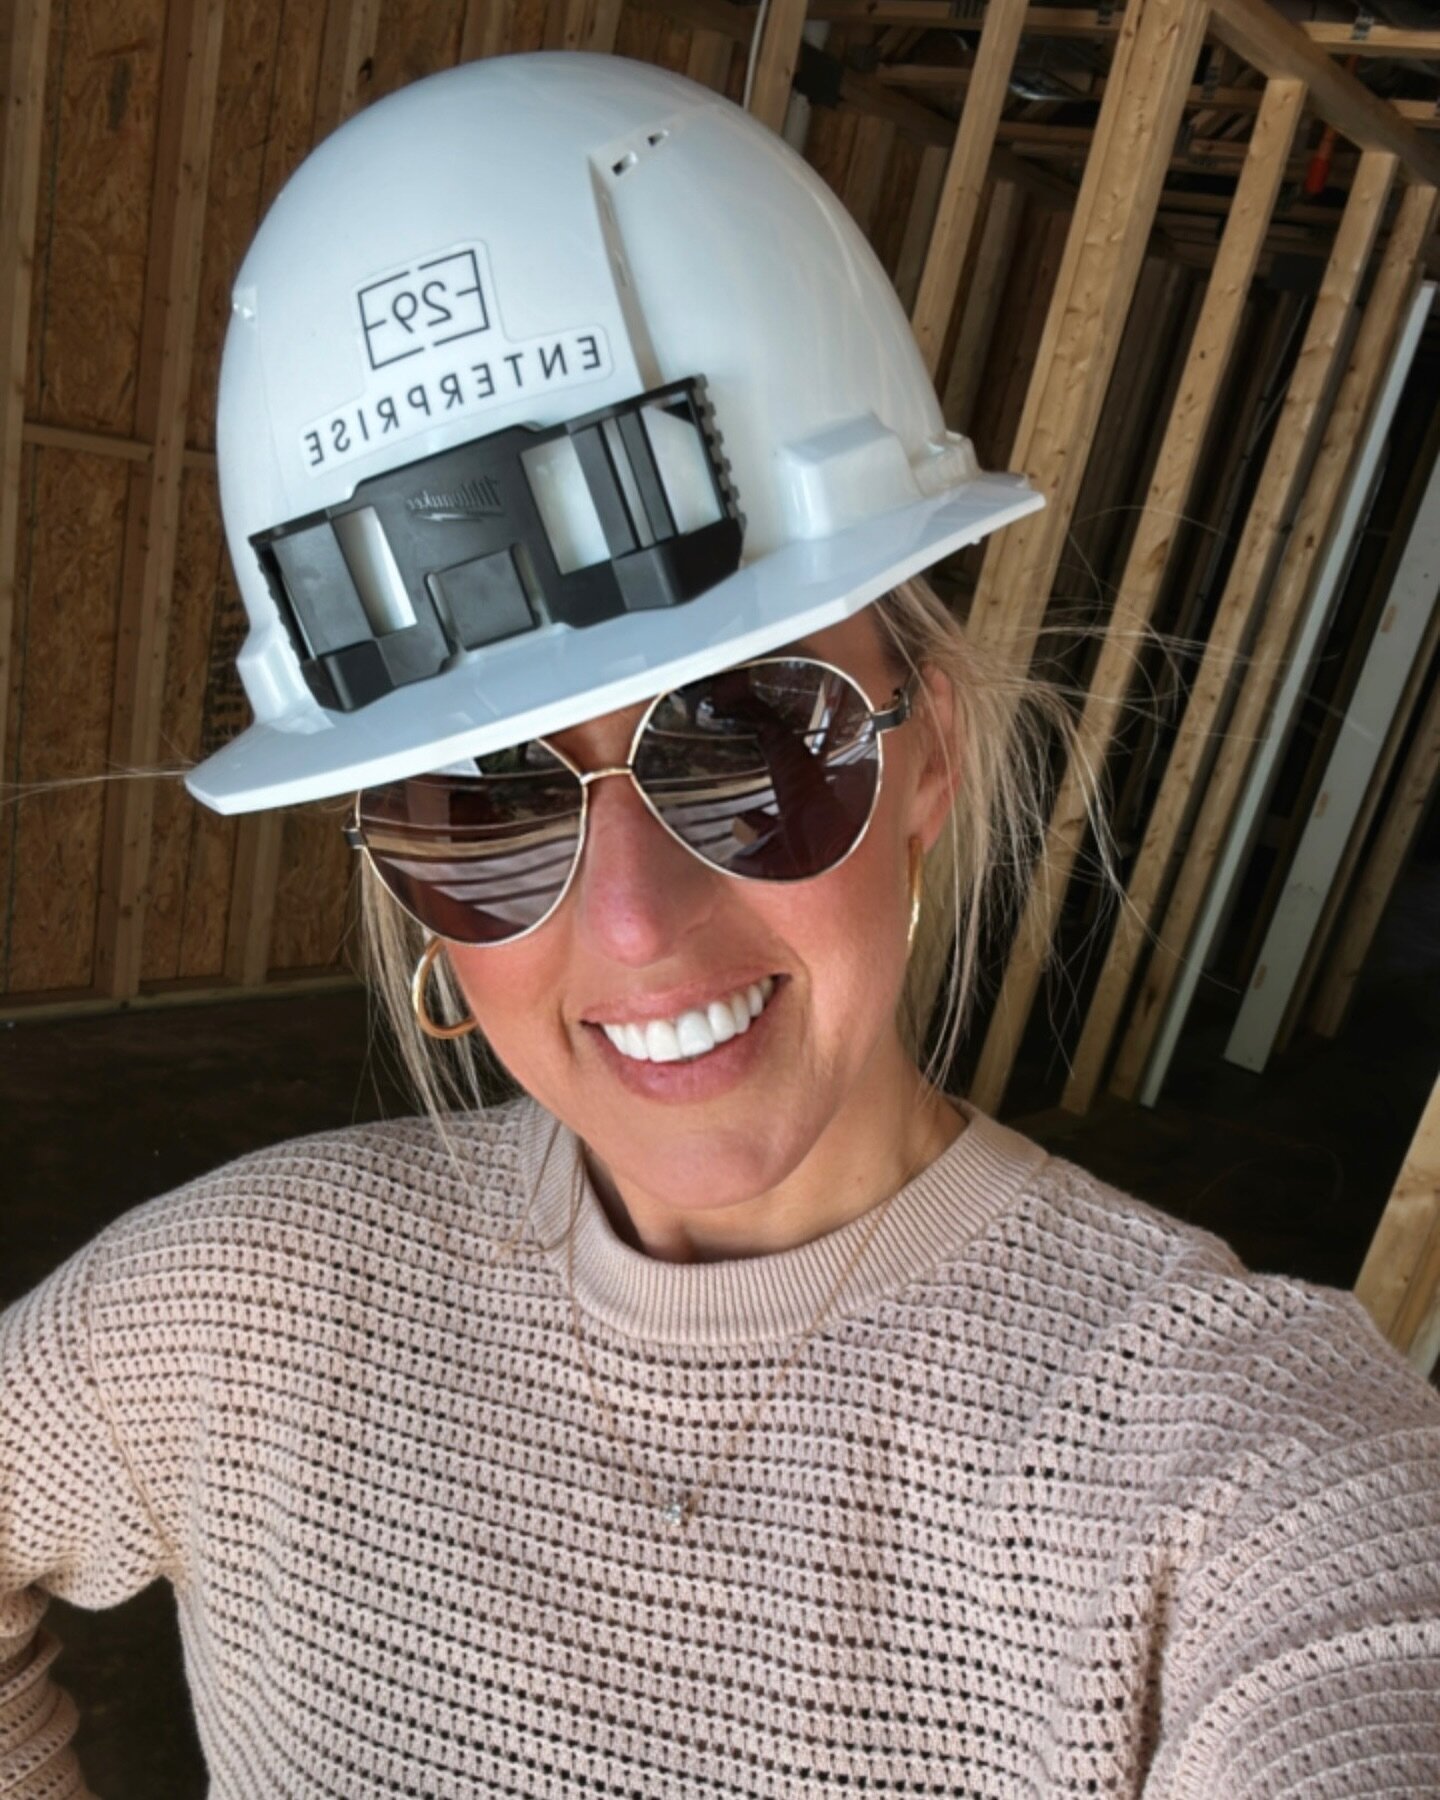 Construction fashion!  Safety first at the @29enterprisecondos by @graysonhomesllc. 

Want to own one of these luxury condos in The Village District we only have limited units remaining and if you reserve in the next 2 weeks you can still customize y